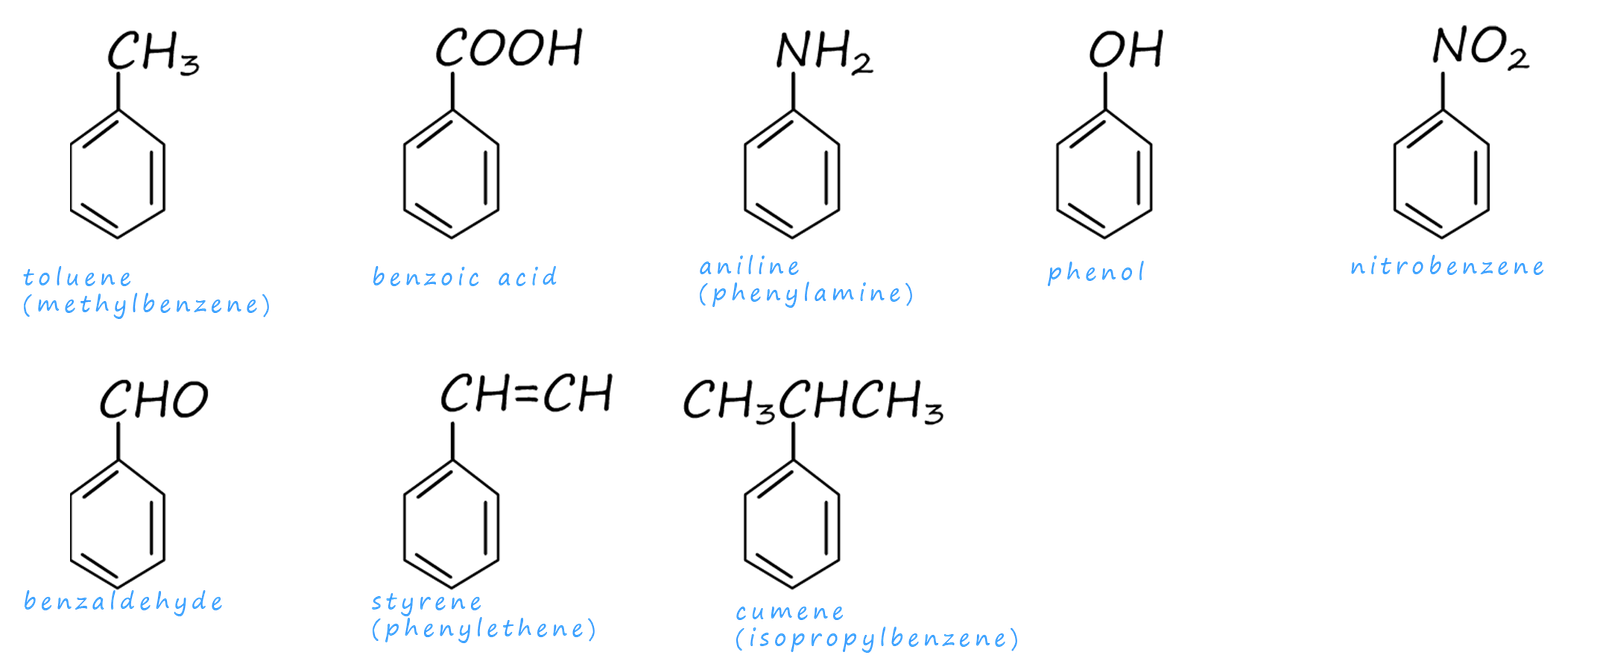 Naming aromatic compounds